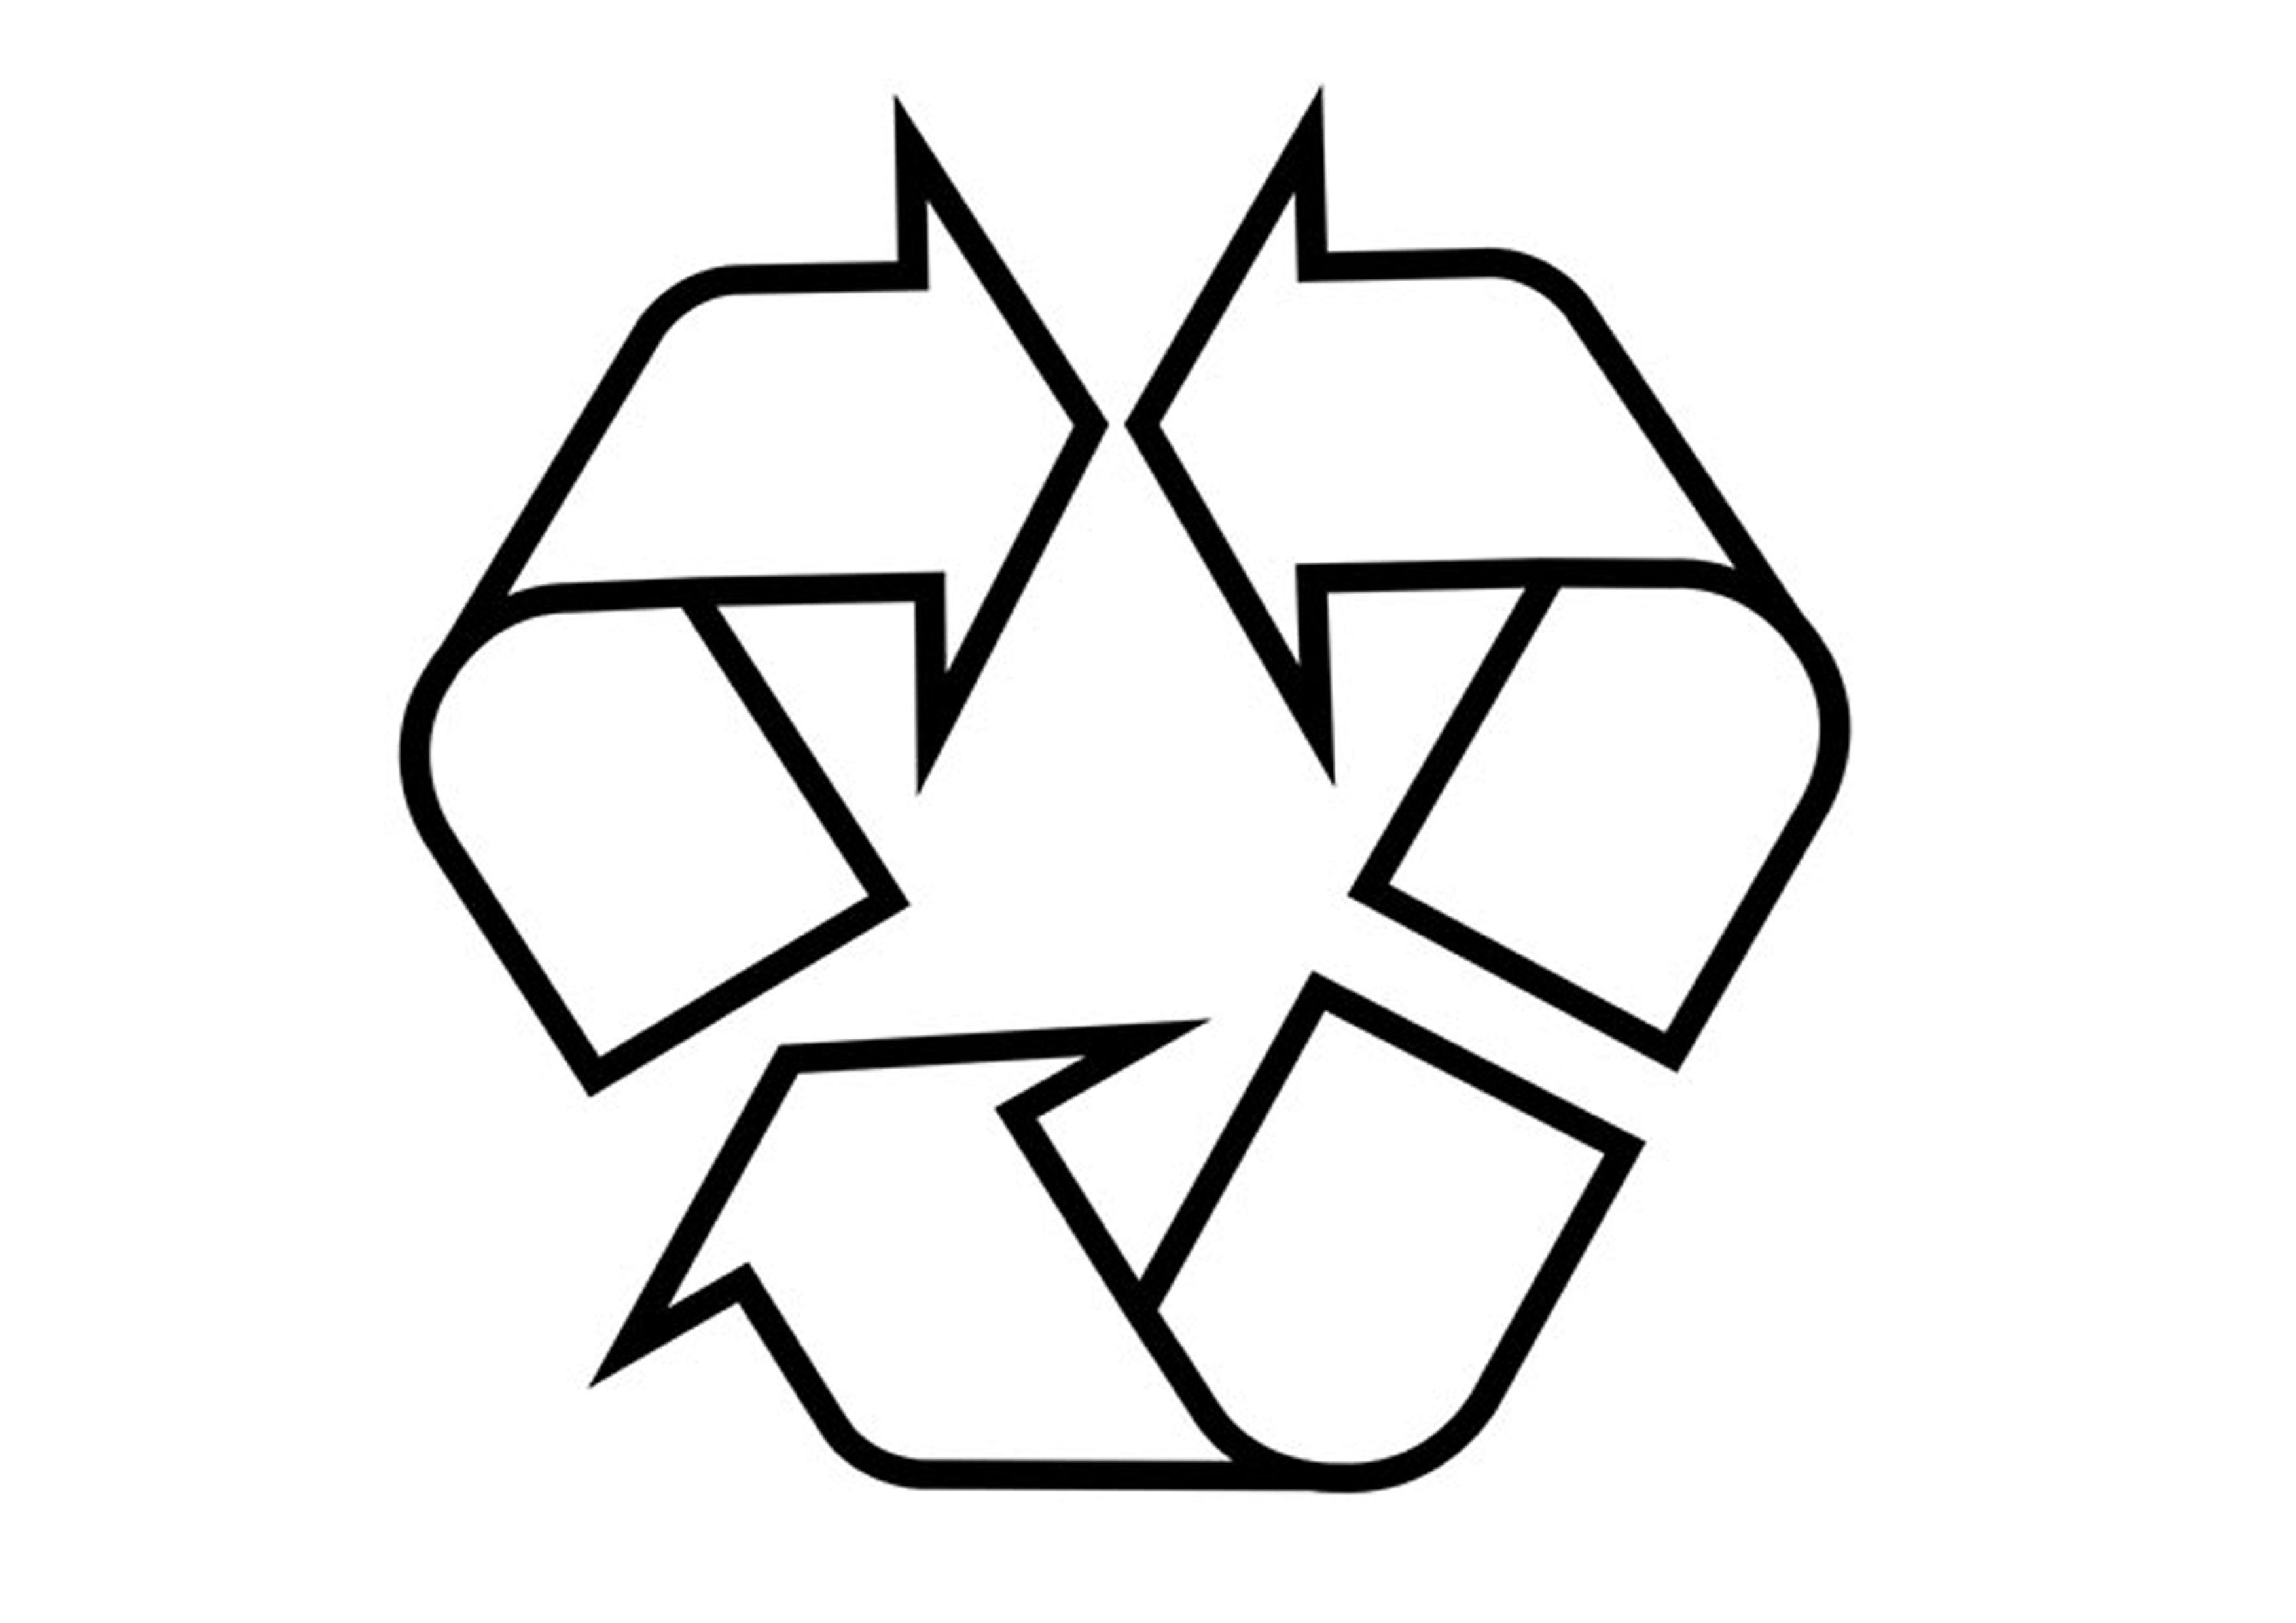 White Recycle Logo - White Recycle Logo - ClipArt Best - Cliparts.co